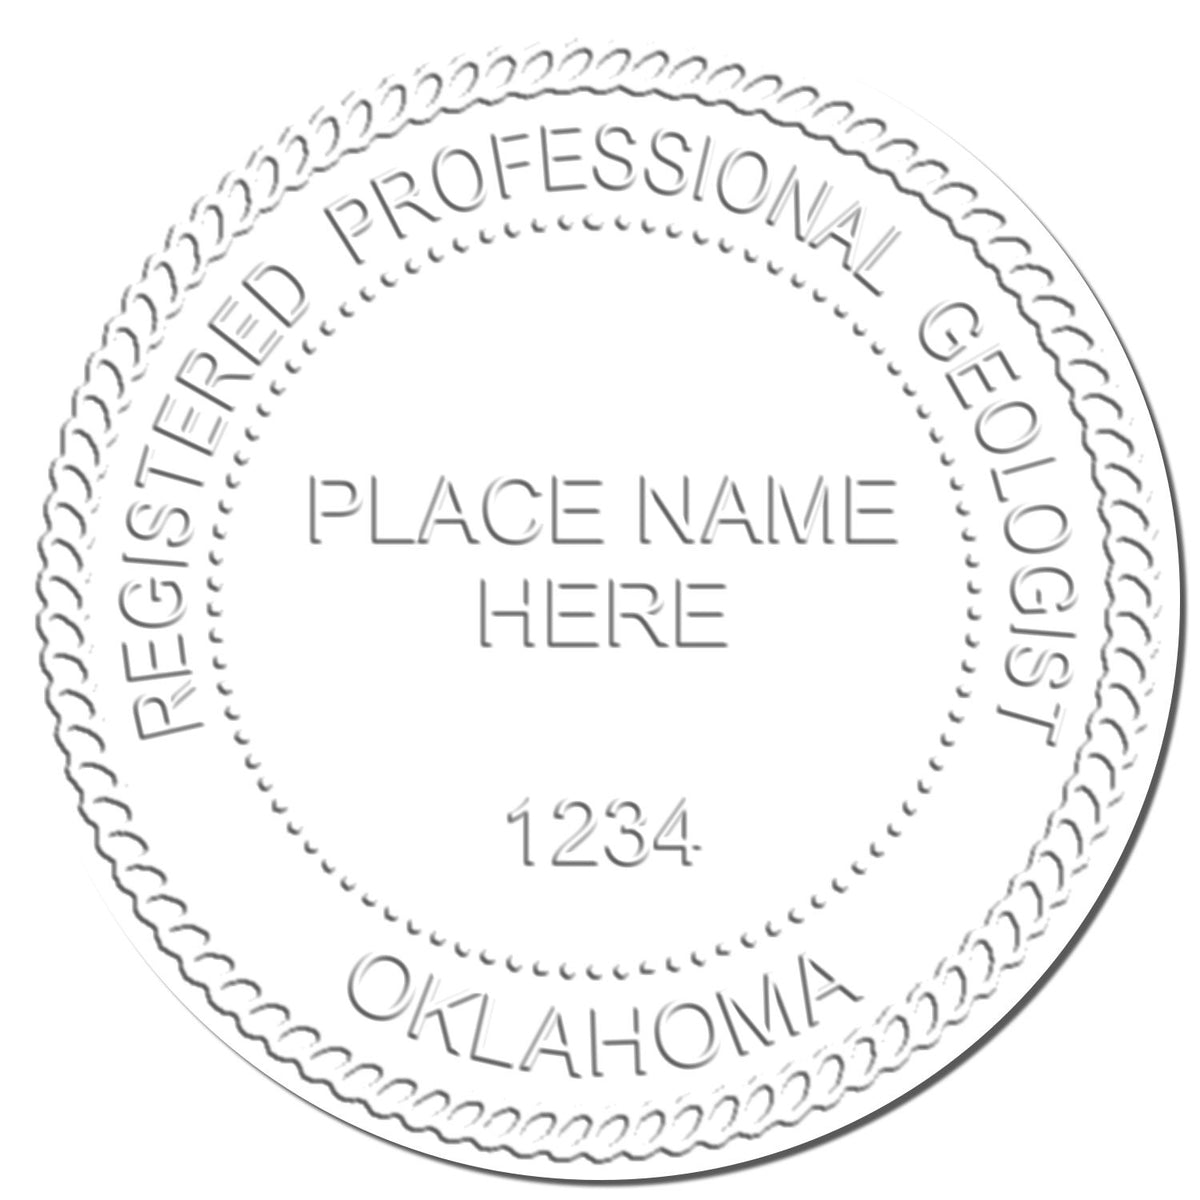 This paper is stamped with a sample imprint of the Handheld Oklahoma Professional Geologist Embosser, signifying its quality and reliability.